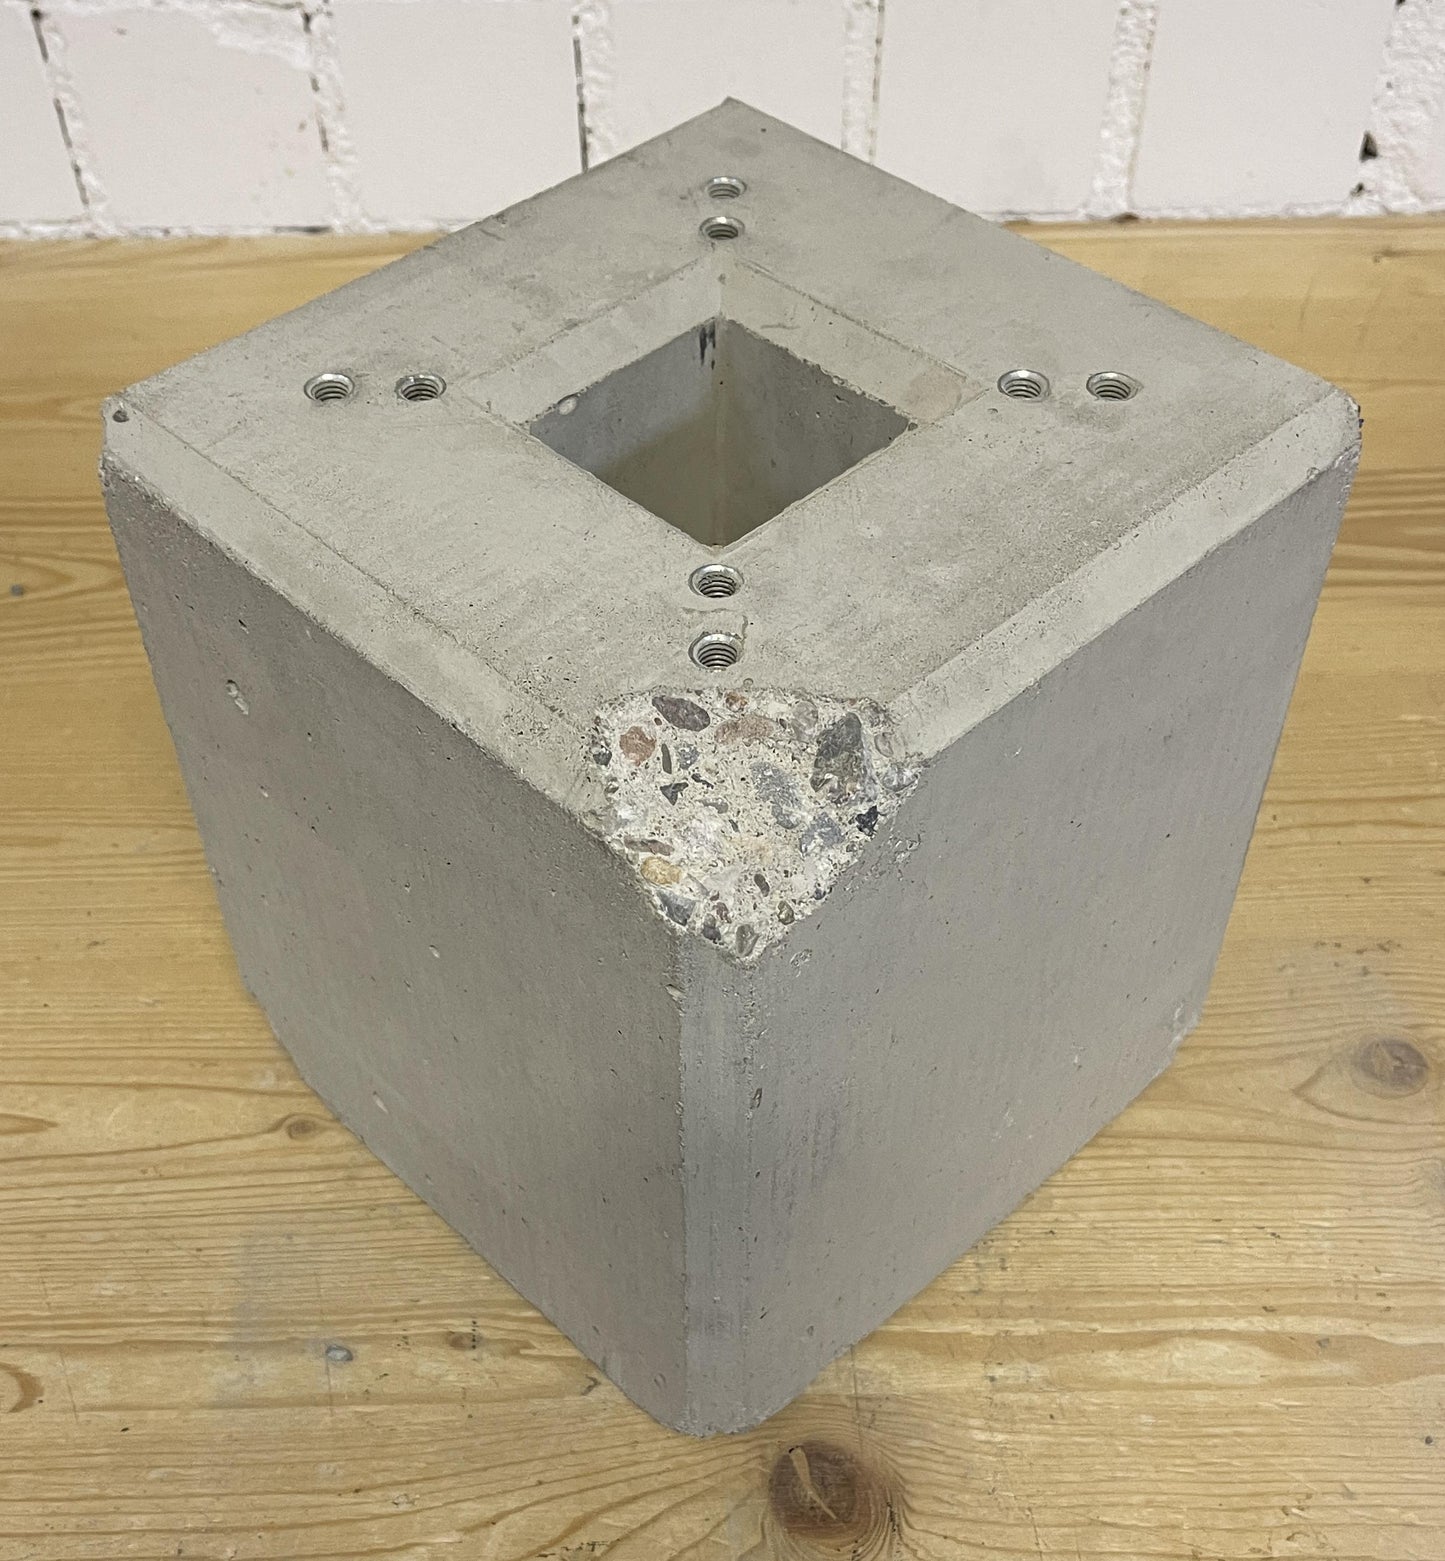 Ready-made concrete foundation for “DIE-LADESÄULE.DE” charging column, base or stele